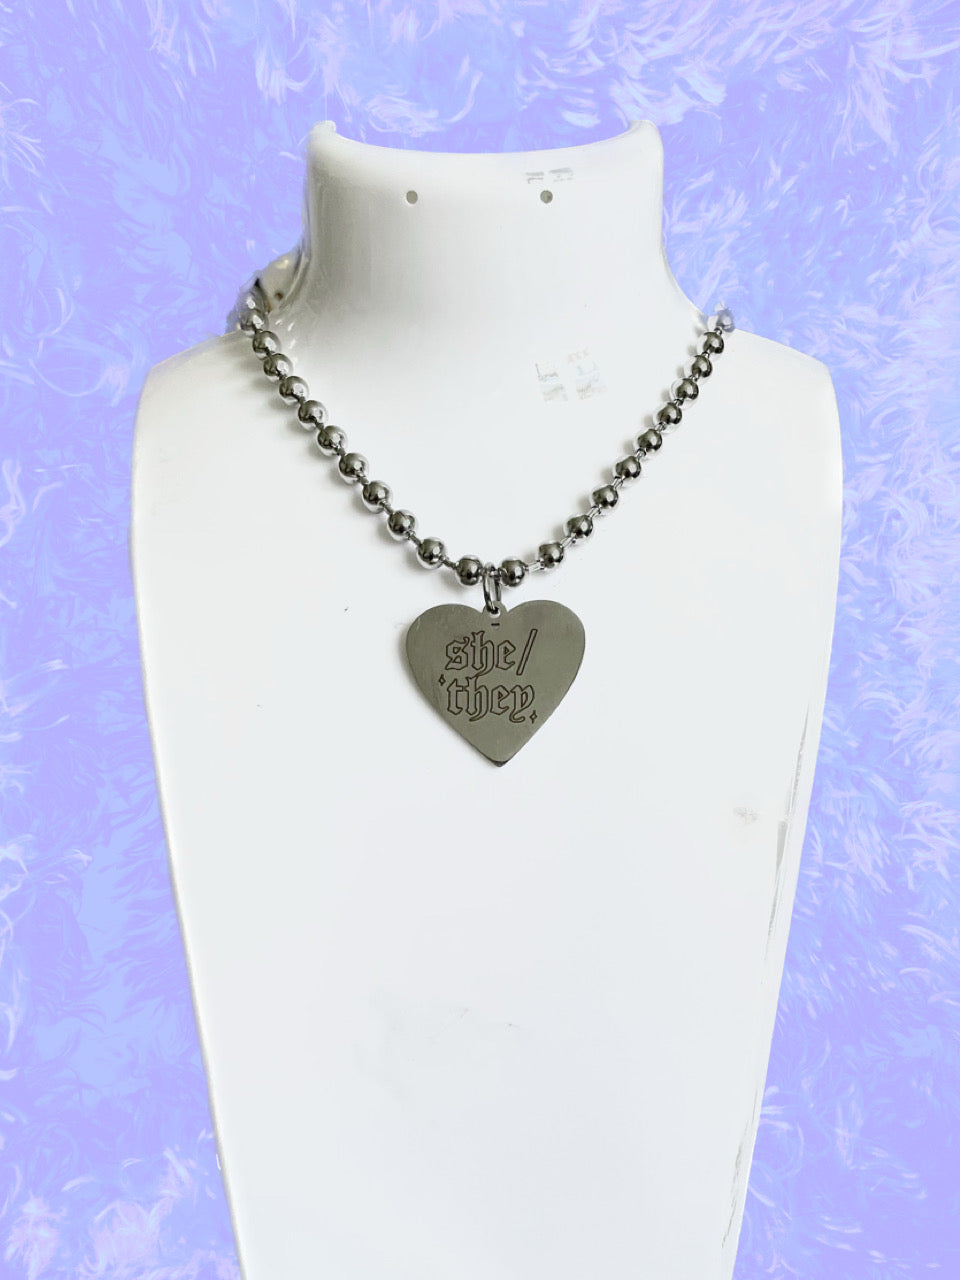 he/they ✮ she/they heart ball chain necklace